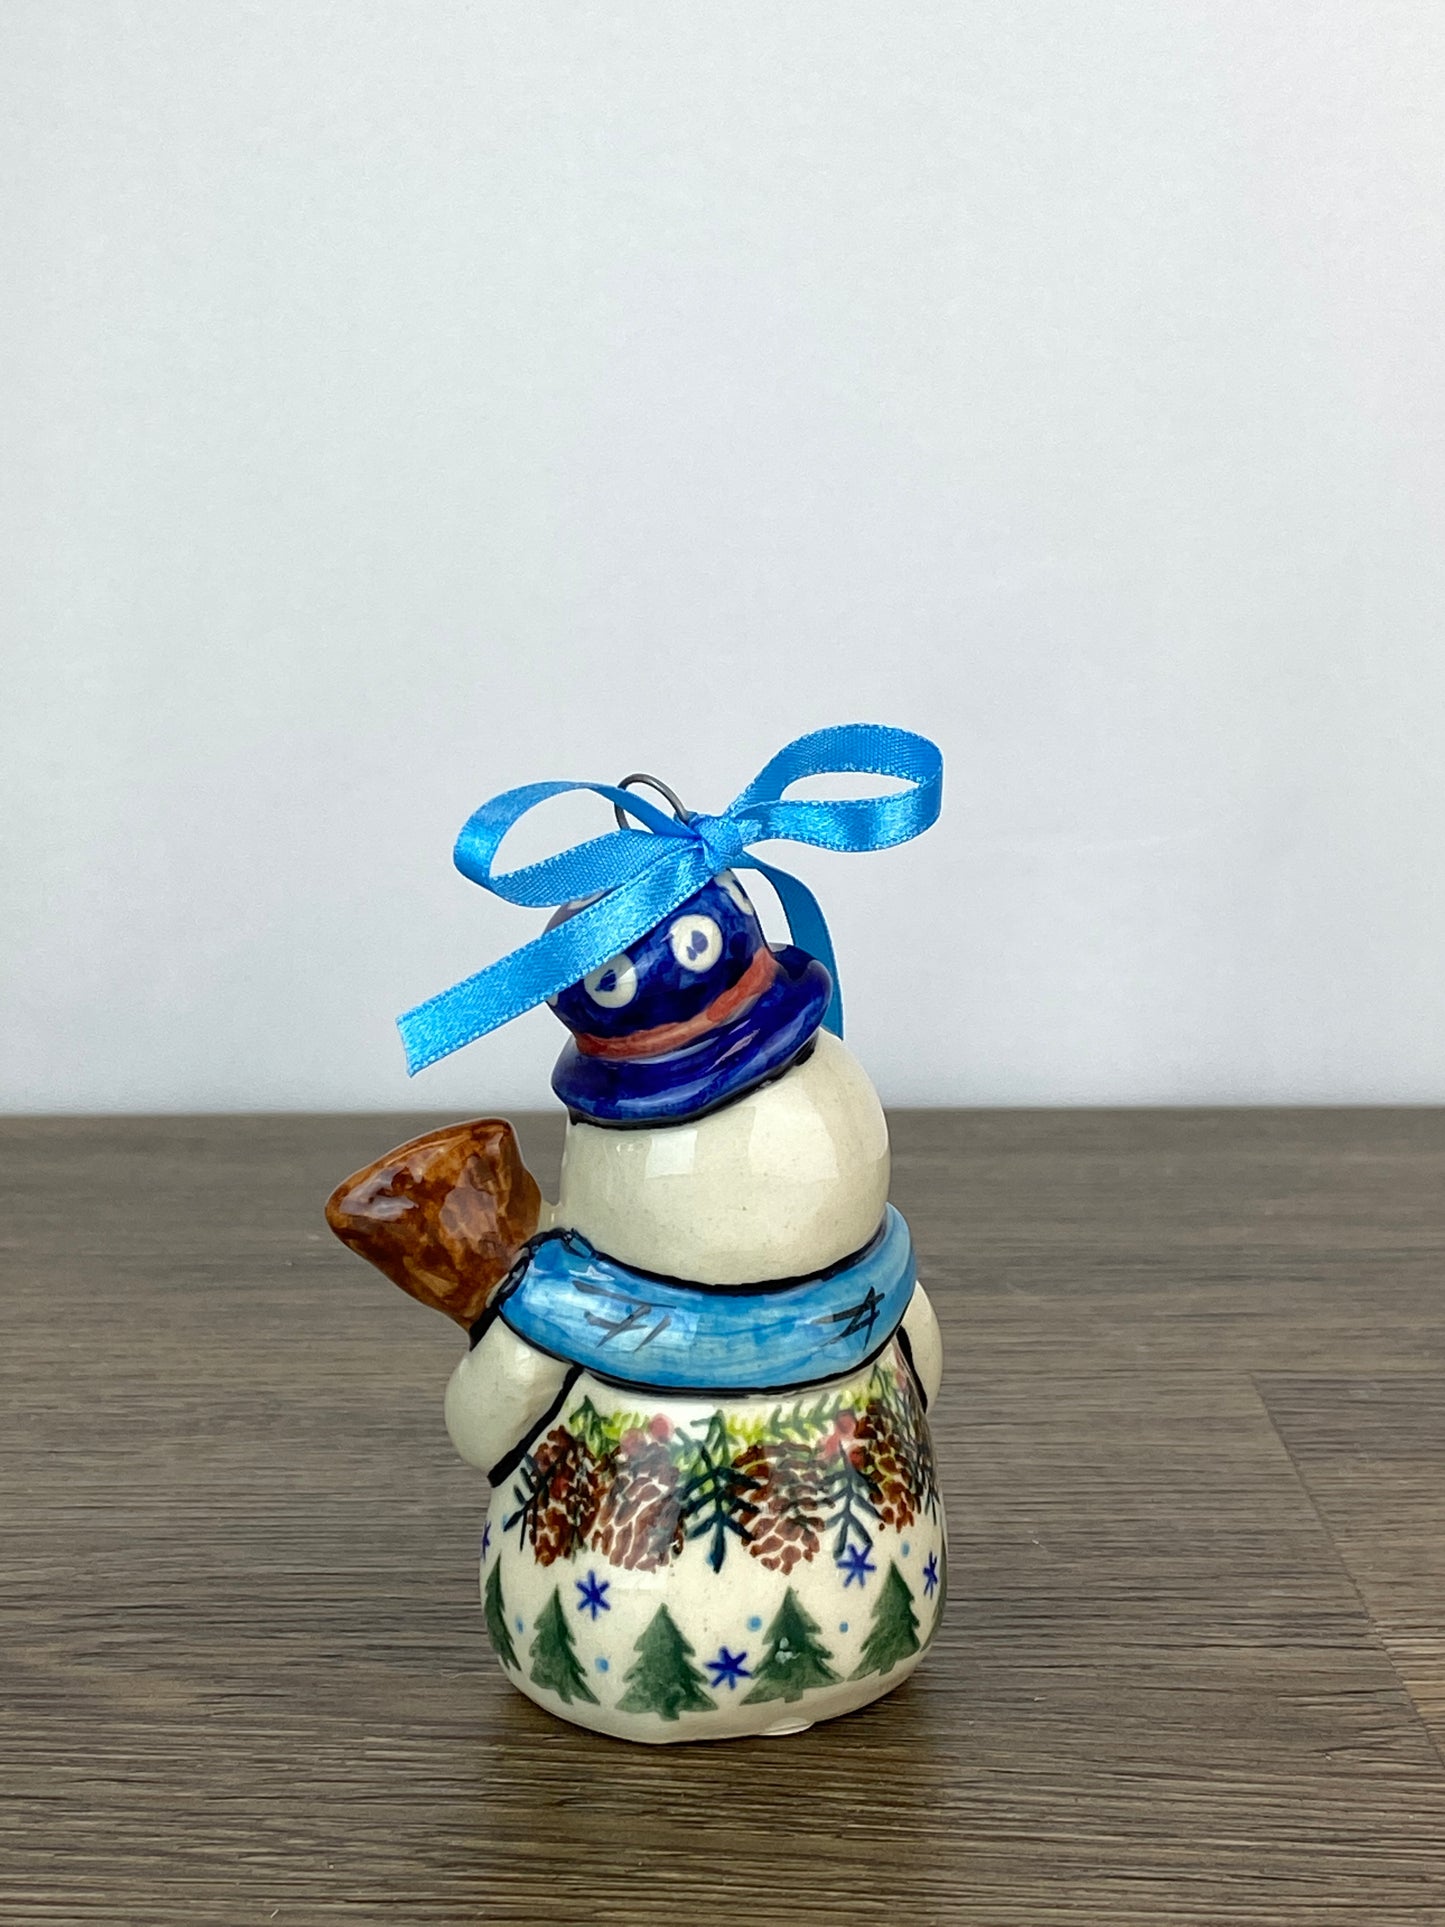 Vena Standing Snowman Ornament - Shape V354 - Blue Scarf and Pine Trees